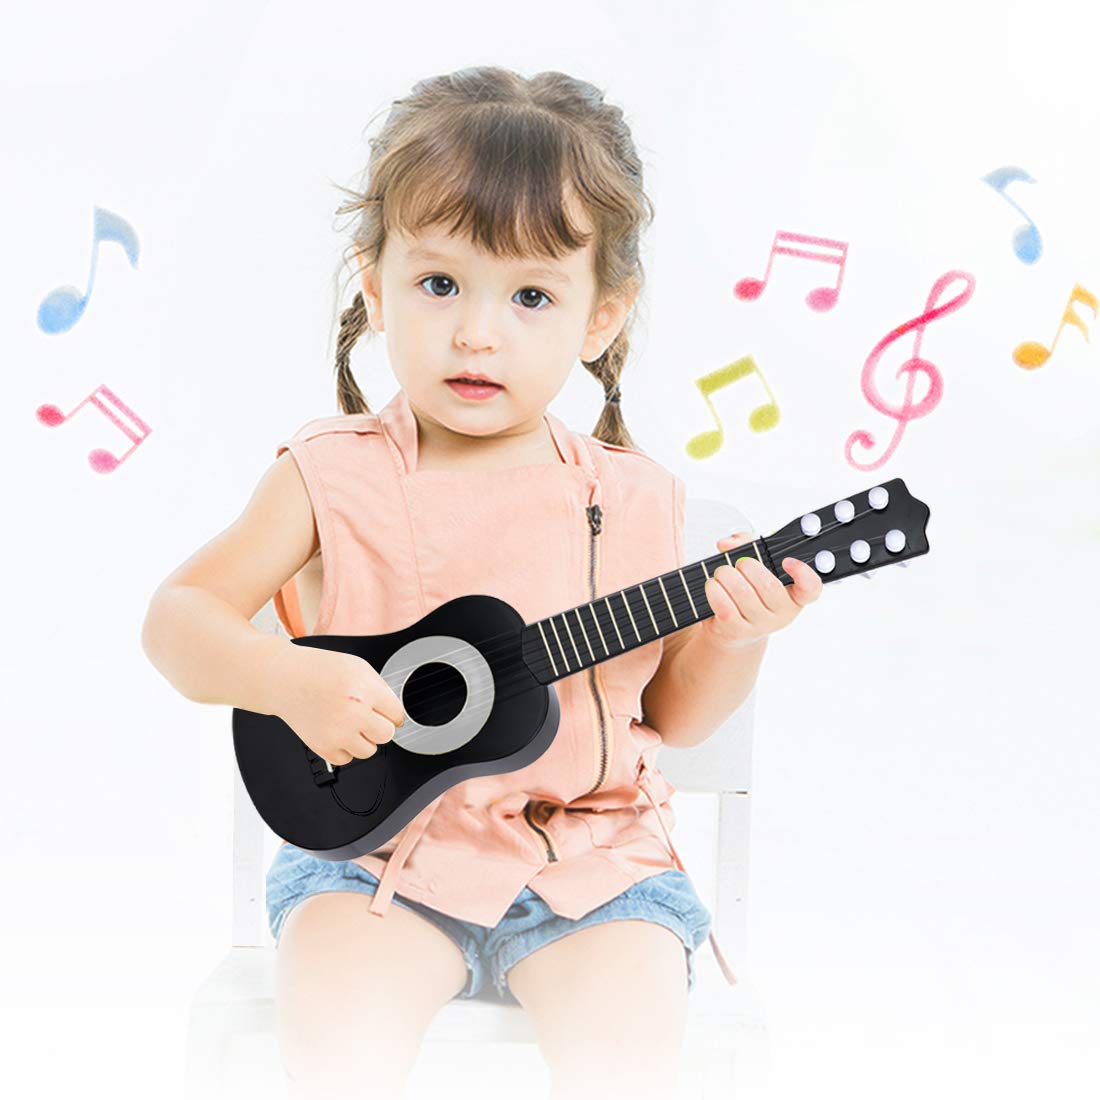 WEY&FLY Kids Toy Guitar 6 String, Baby Kids Cute Guitar Rhyme Developmental Musical Instrument Educational Toy for Toddlers (Black/Silver)